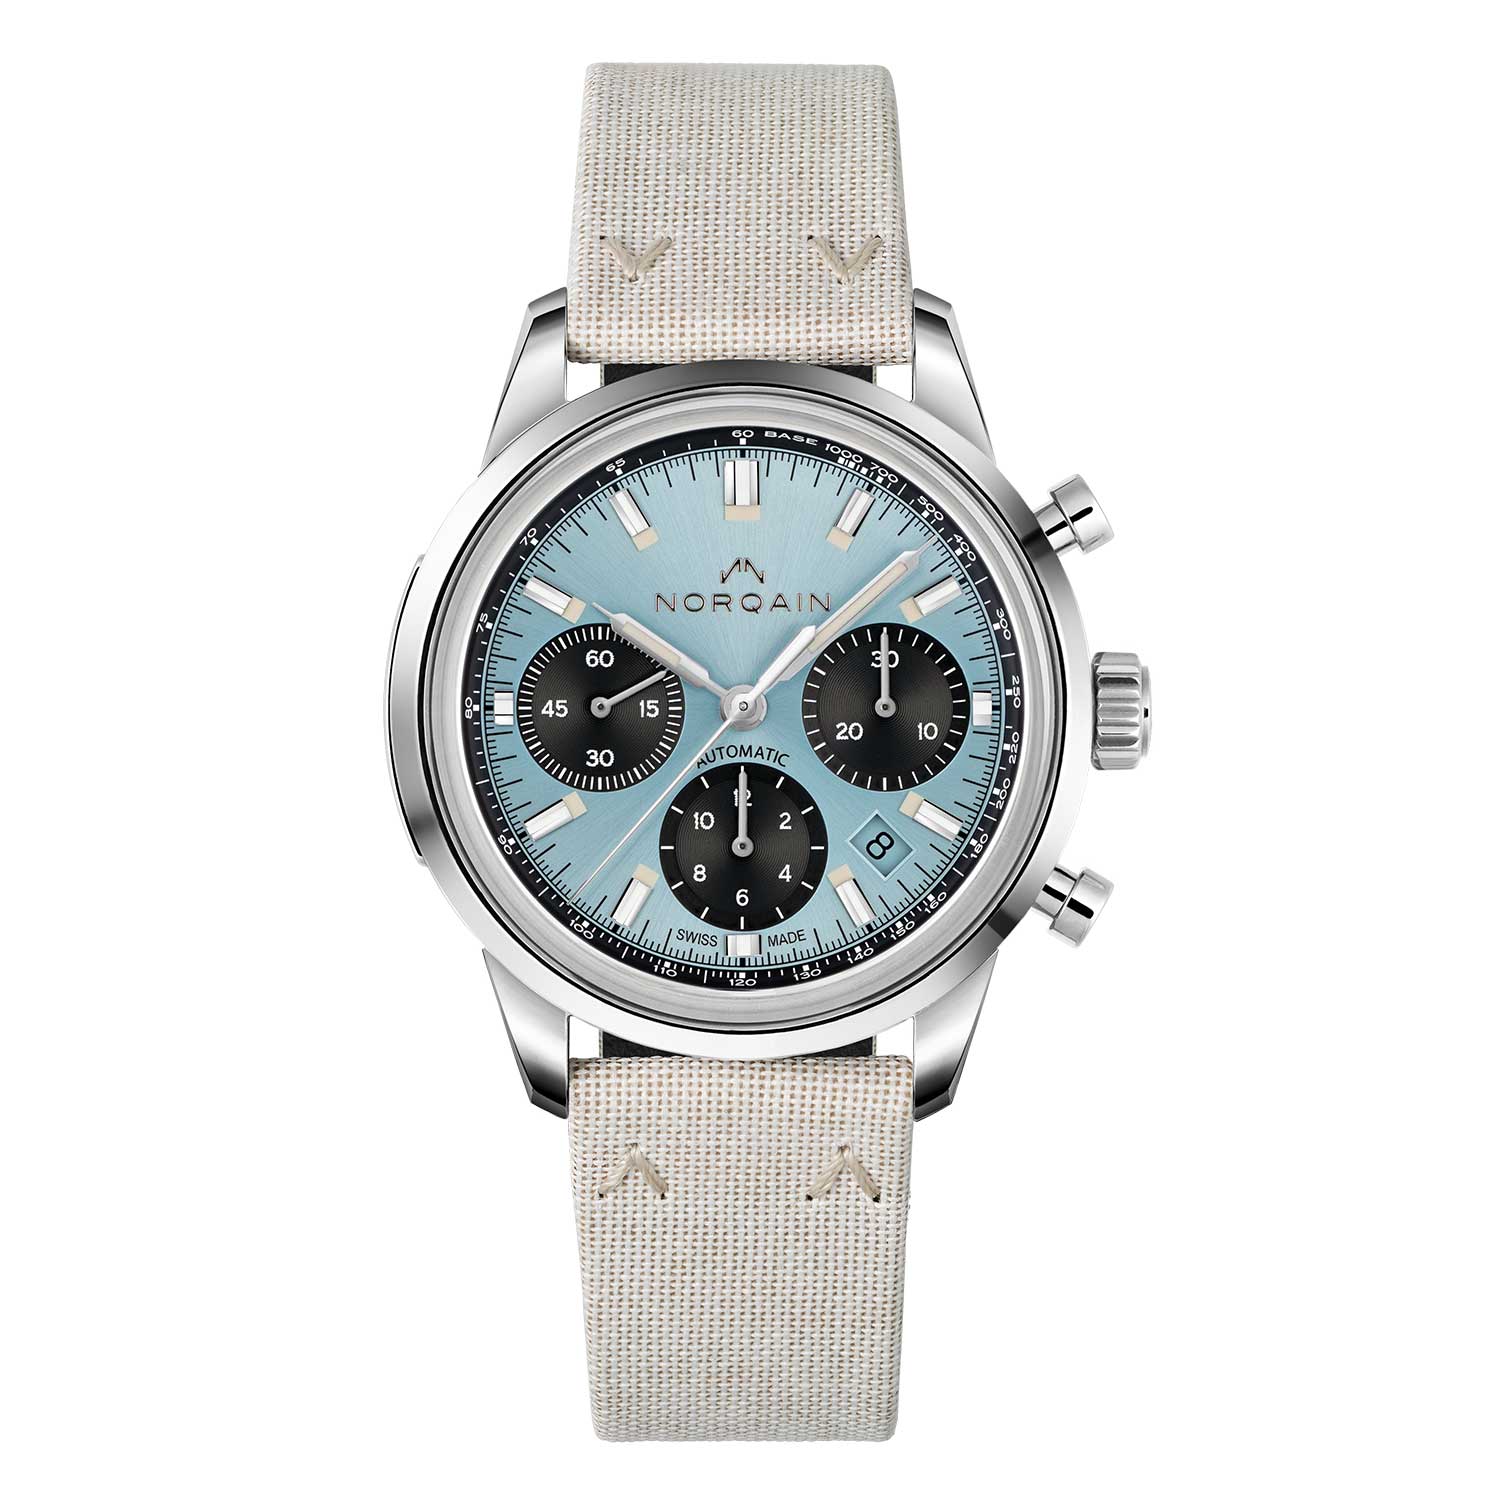 Norqain Freedom 60 Chrono Ice Blue Limited Edition with Ivory Nortide strap